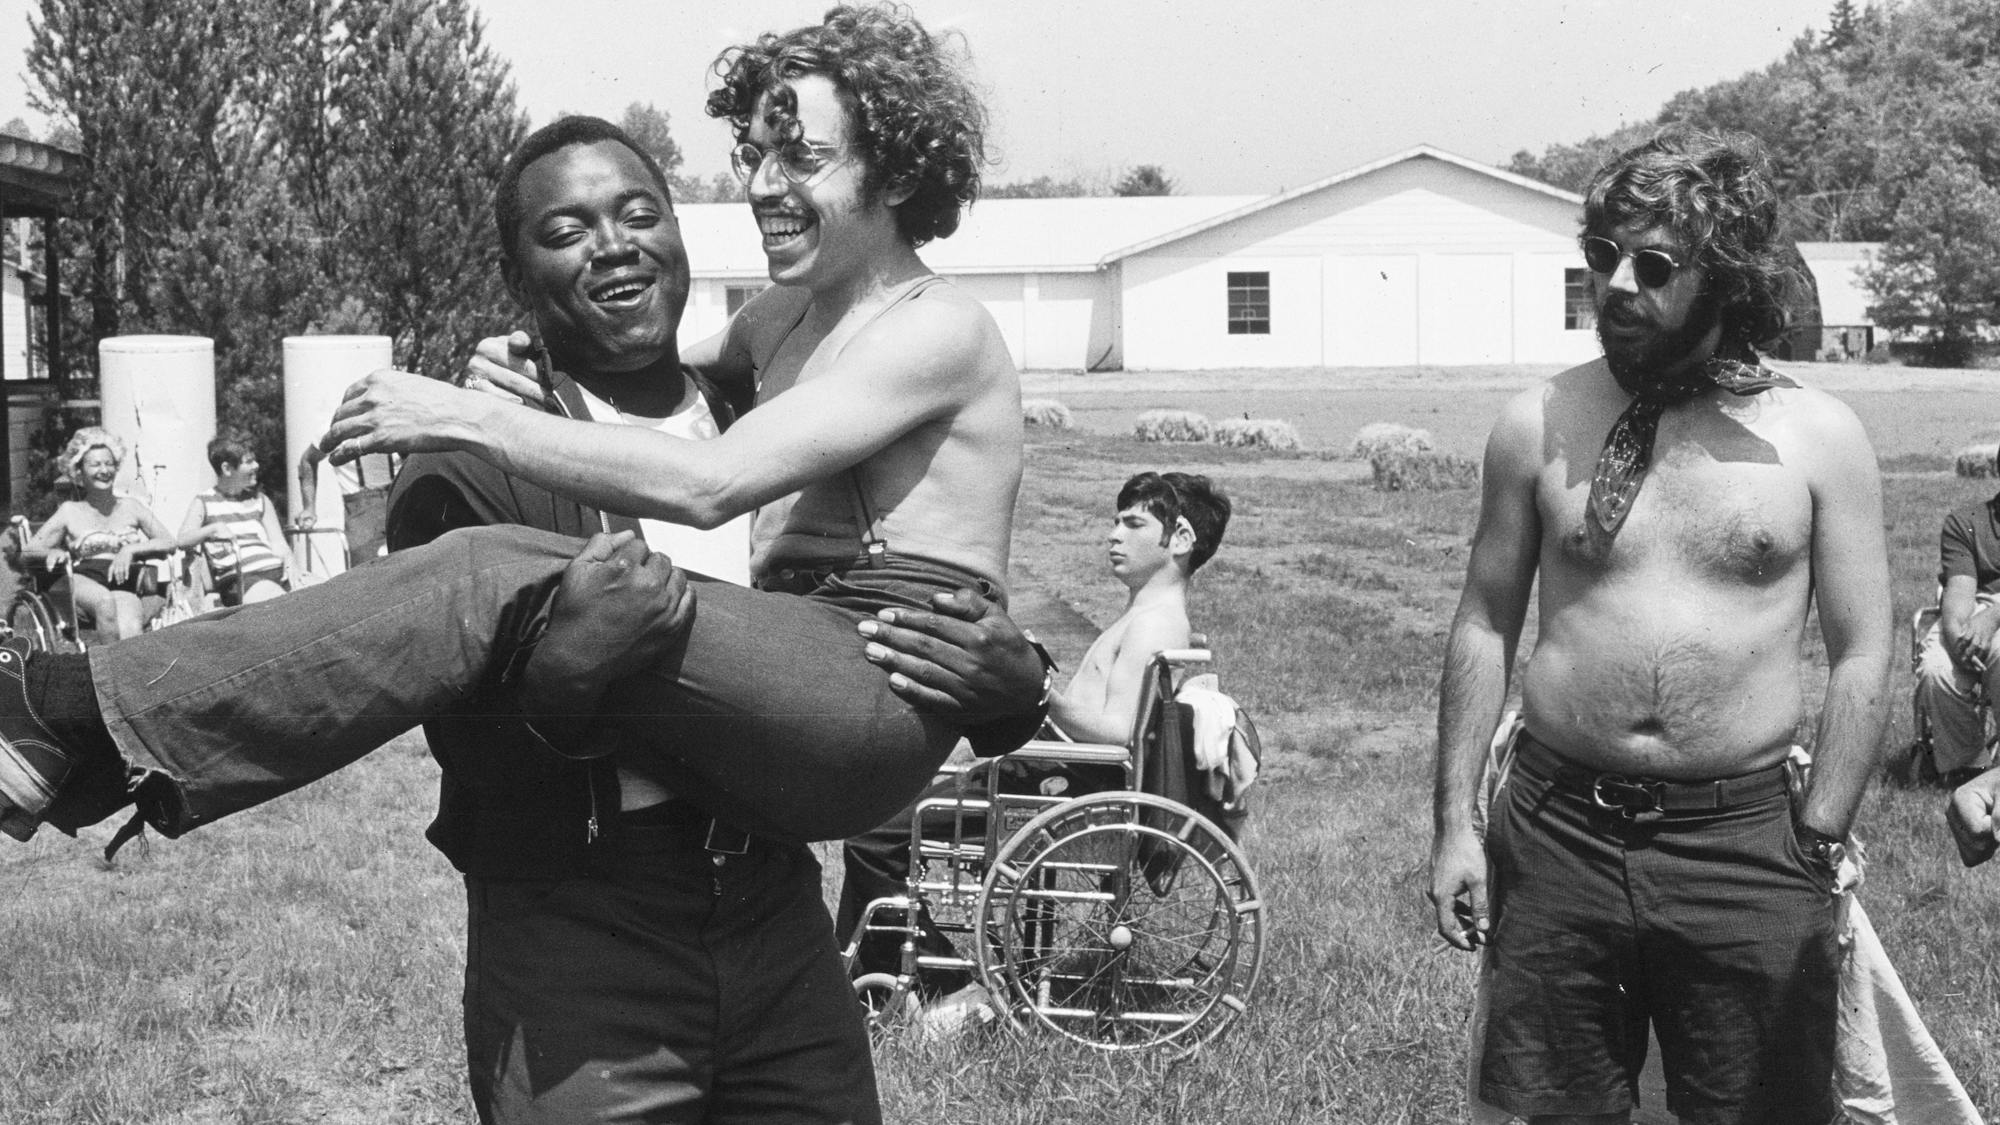 A black-and-white photograph of teenagers at camp. In the foreground, one camper carries his wheelchair-bound friend, both laughing, while another camper, shirtless and sporting a neckerchief, looks on.